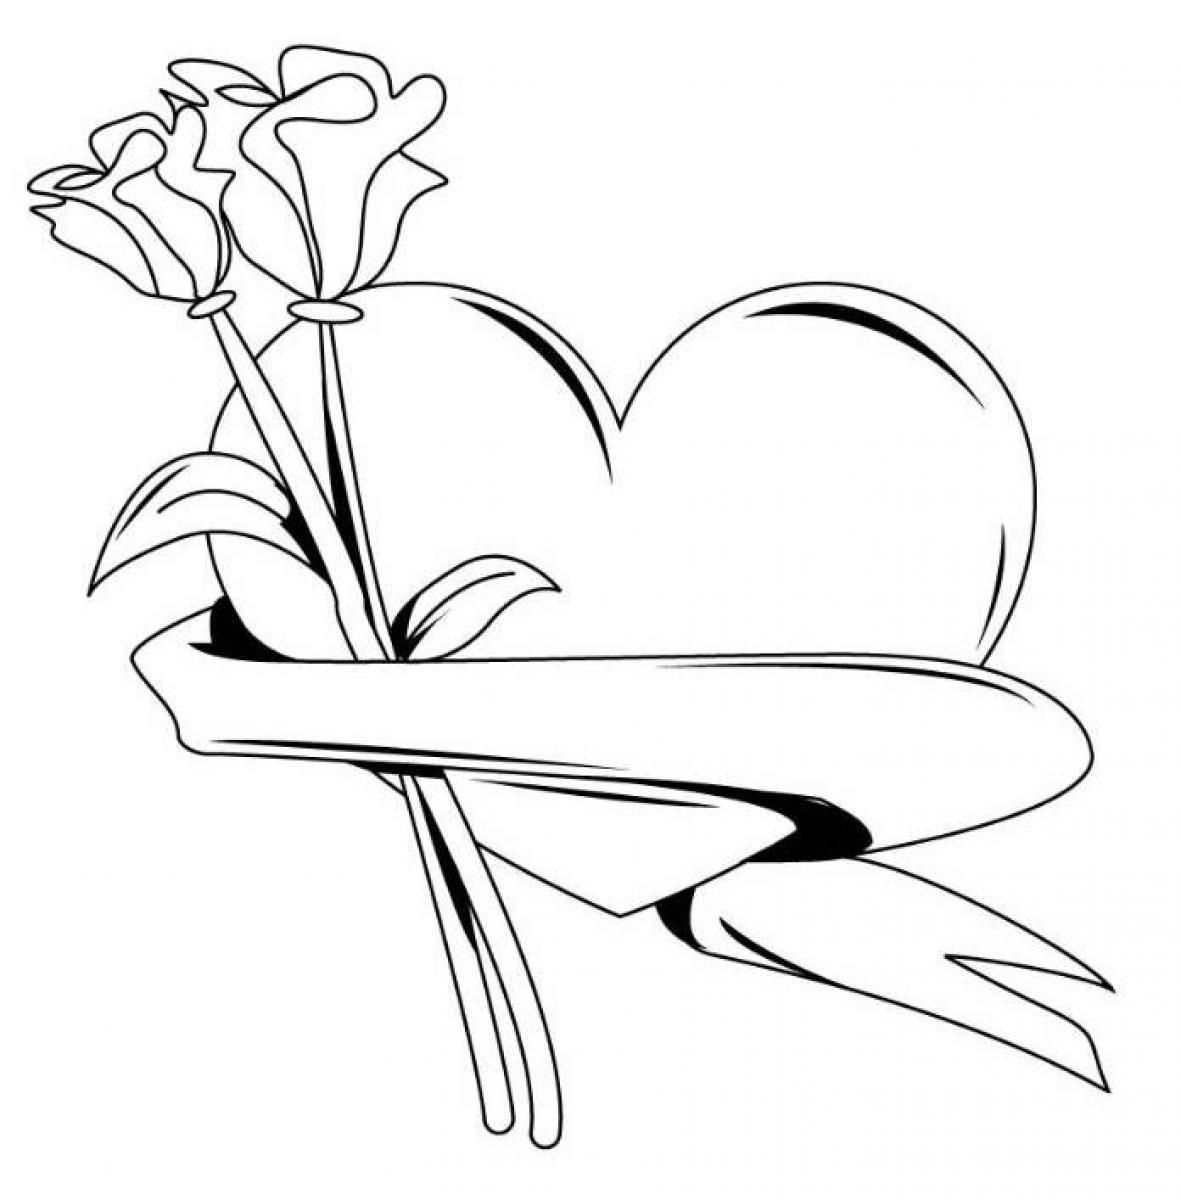 Hearts And Roses Coloring Pages - Coloring Home